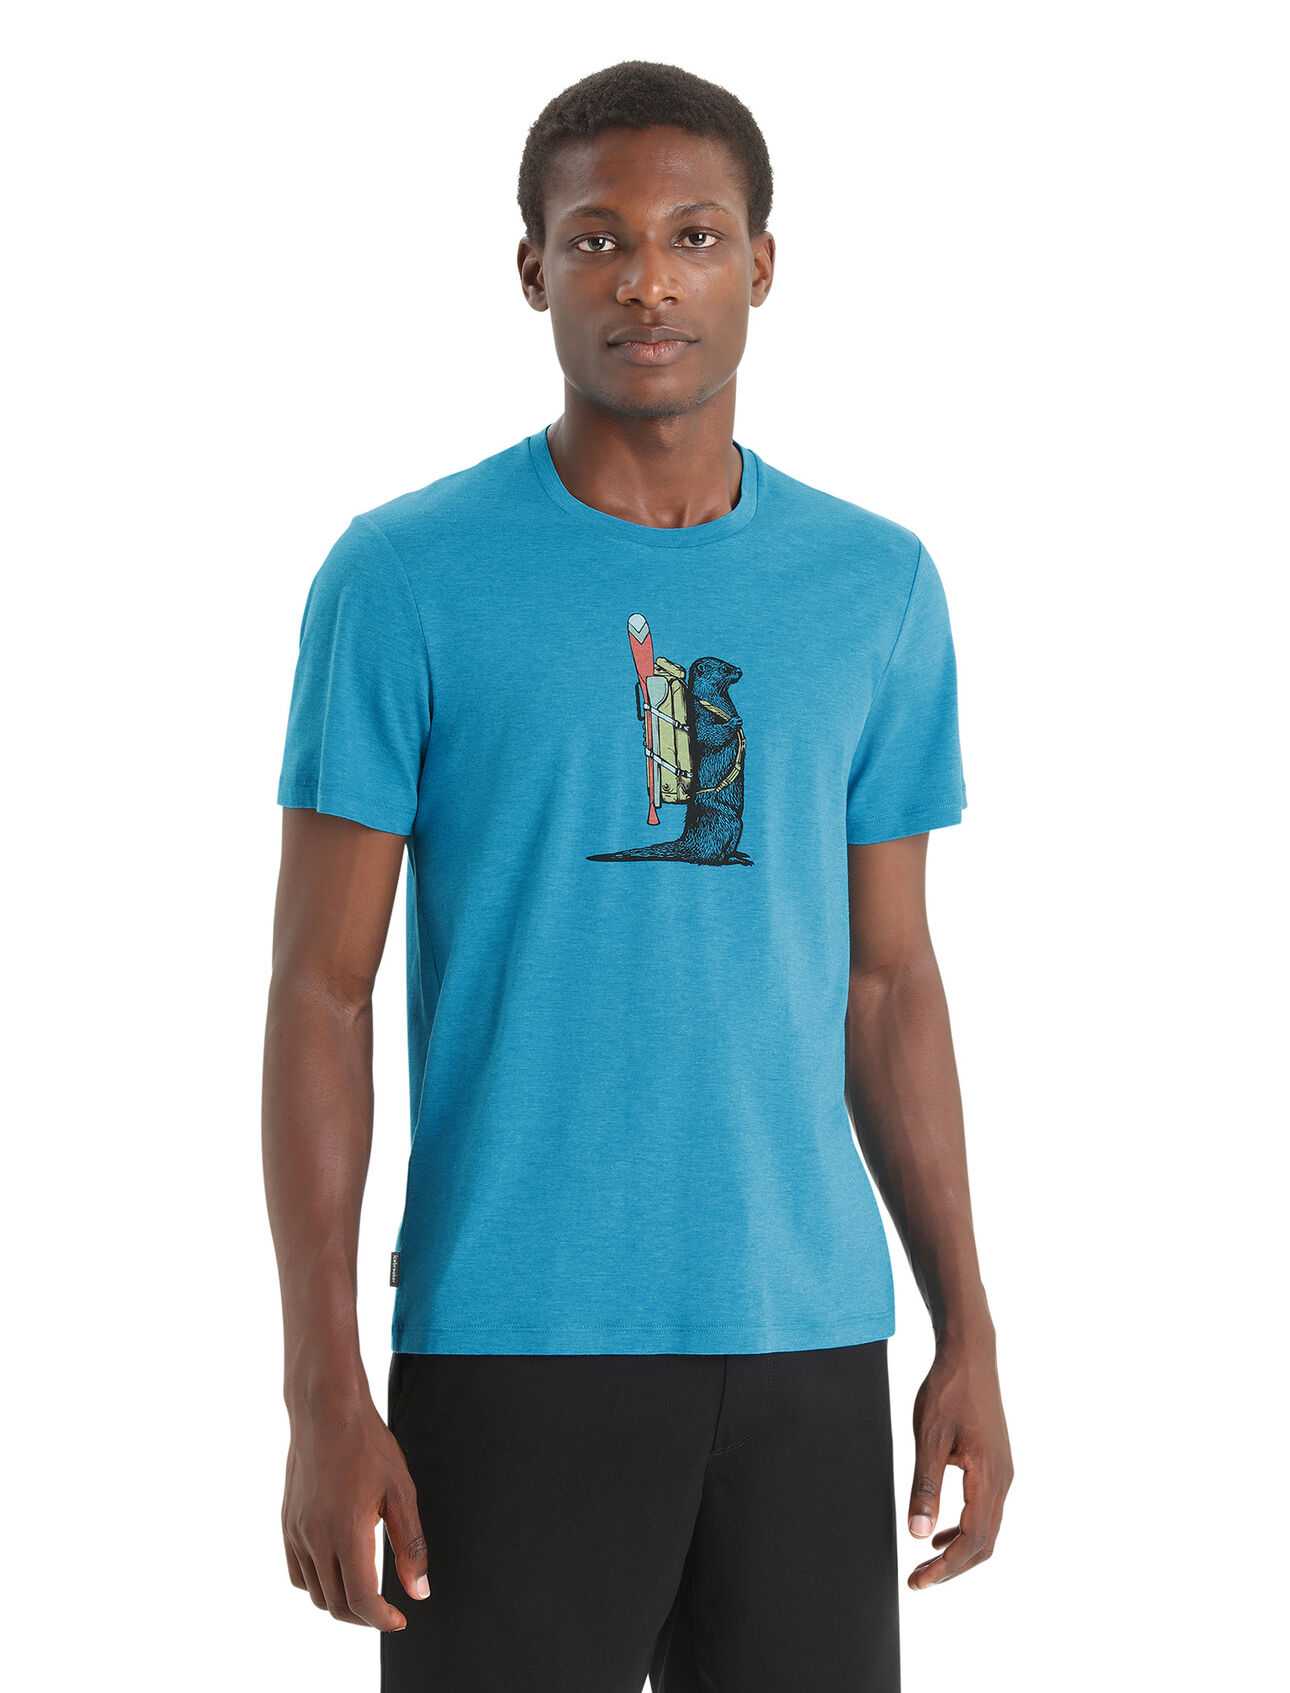 Mens Merino Central Classic Short Sleeve T-Shirt Otter Paddle A clean, classic and comfortable everyday tee that blends natural merino wool with organically grown cotton, the Central Classic Short Sleeve Tee Otter Paddle has you covered any day of the week. 